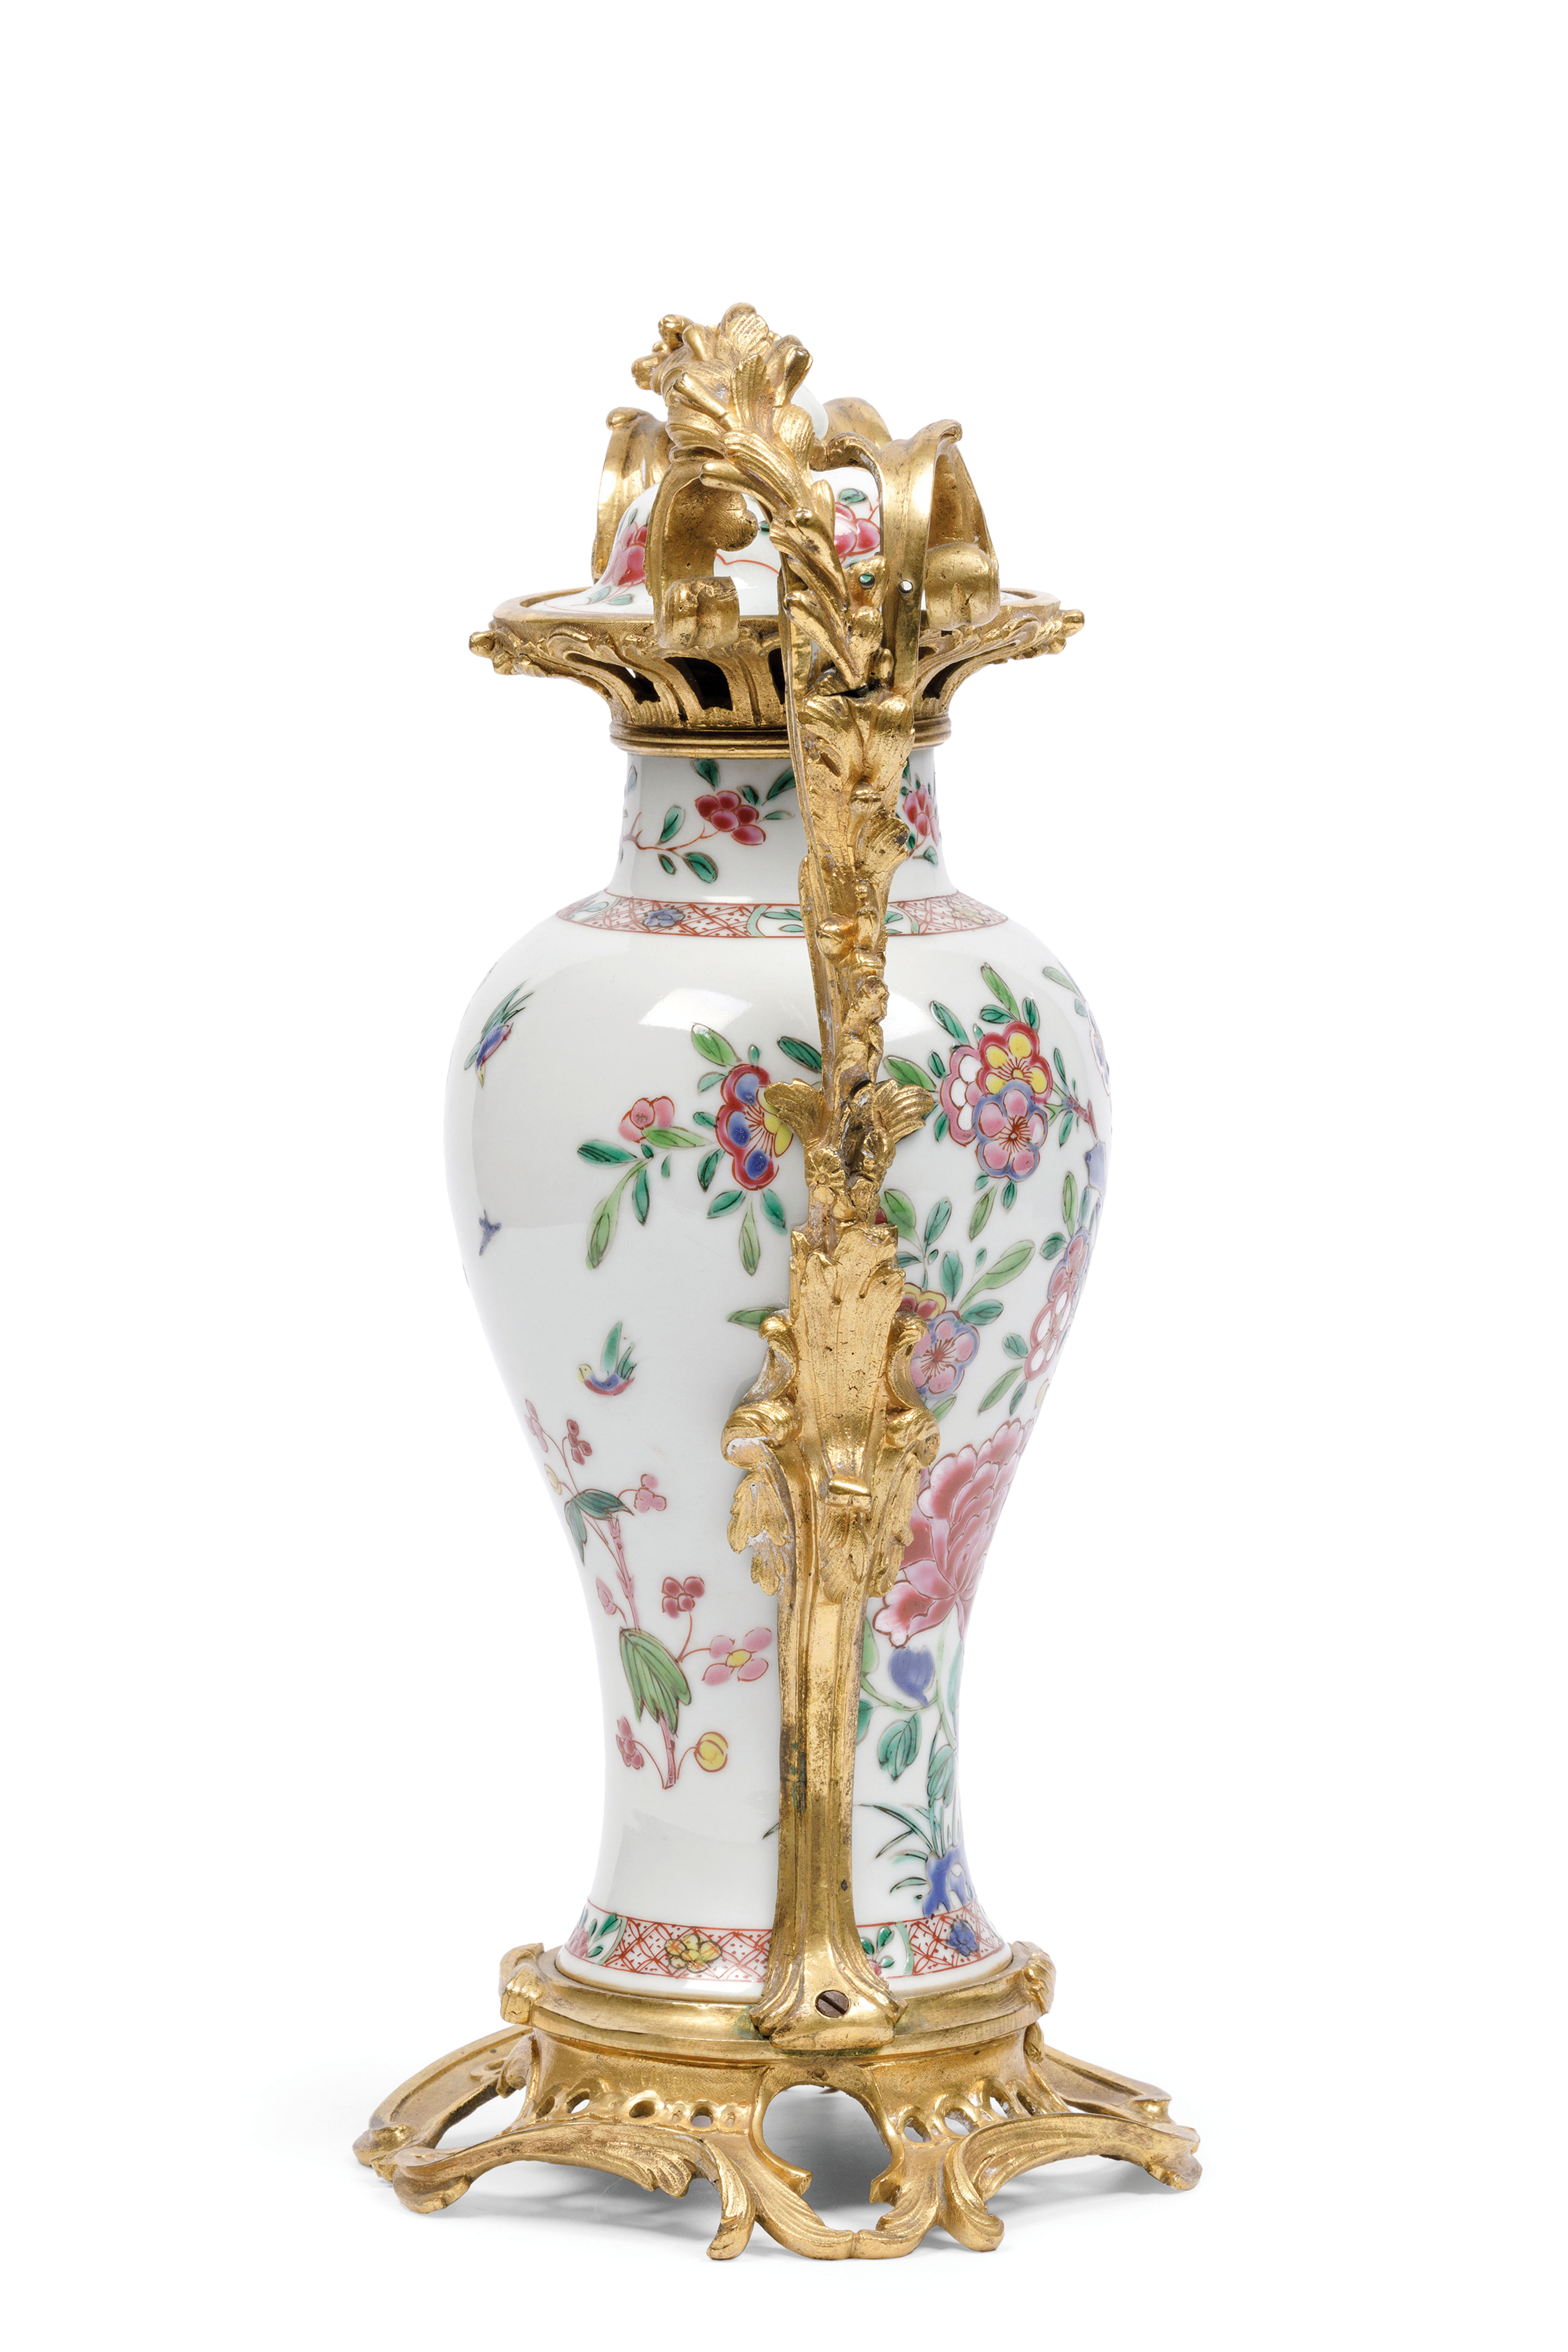 AN ORMOLU-MOUNTED FAMILLE ROSE PORCELAIN POTICHE AND COVER, CHINA, 18TH CENTURY, THE EUROPEAN MOUNT - Image 3 of 4